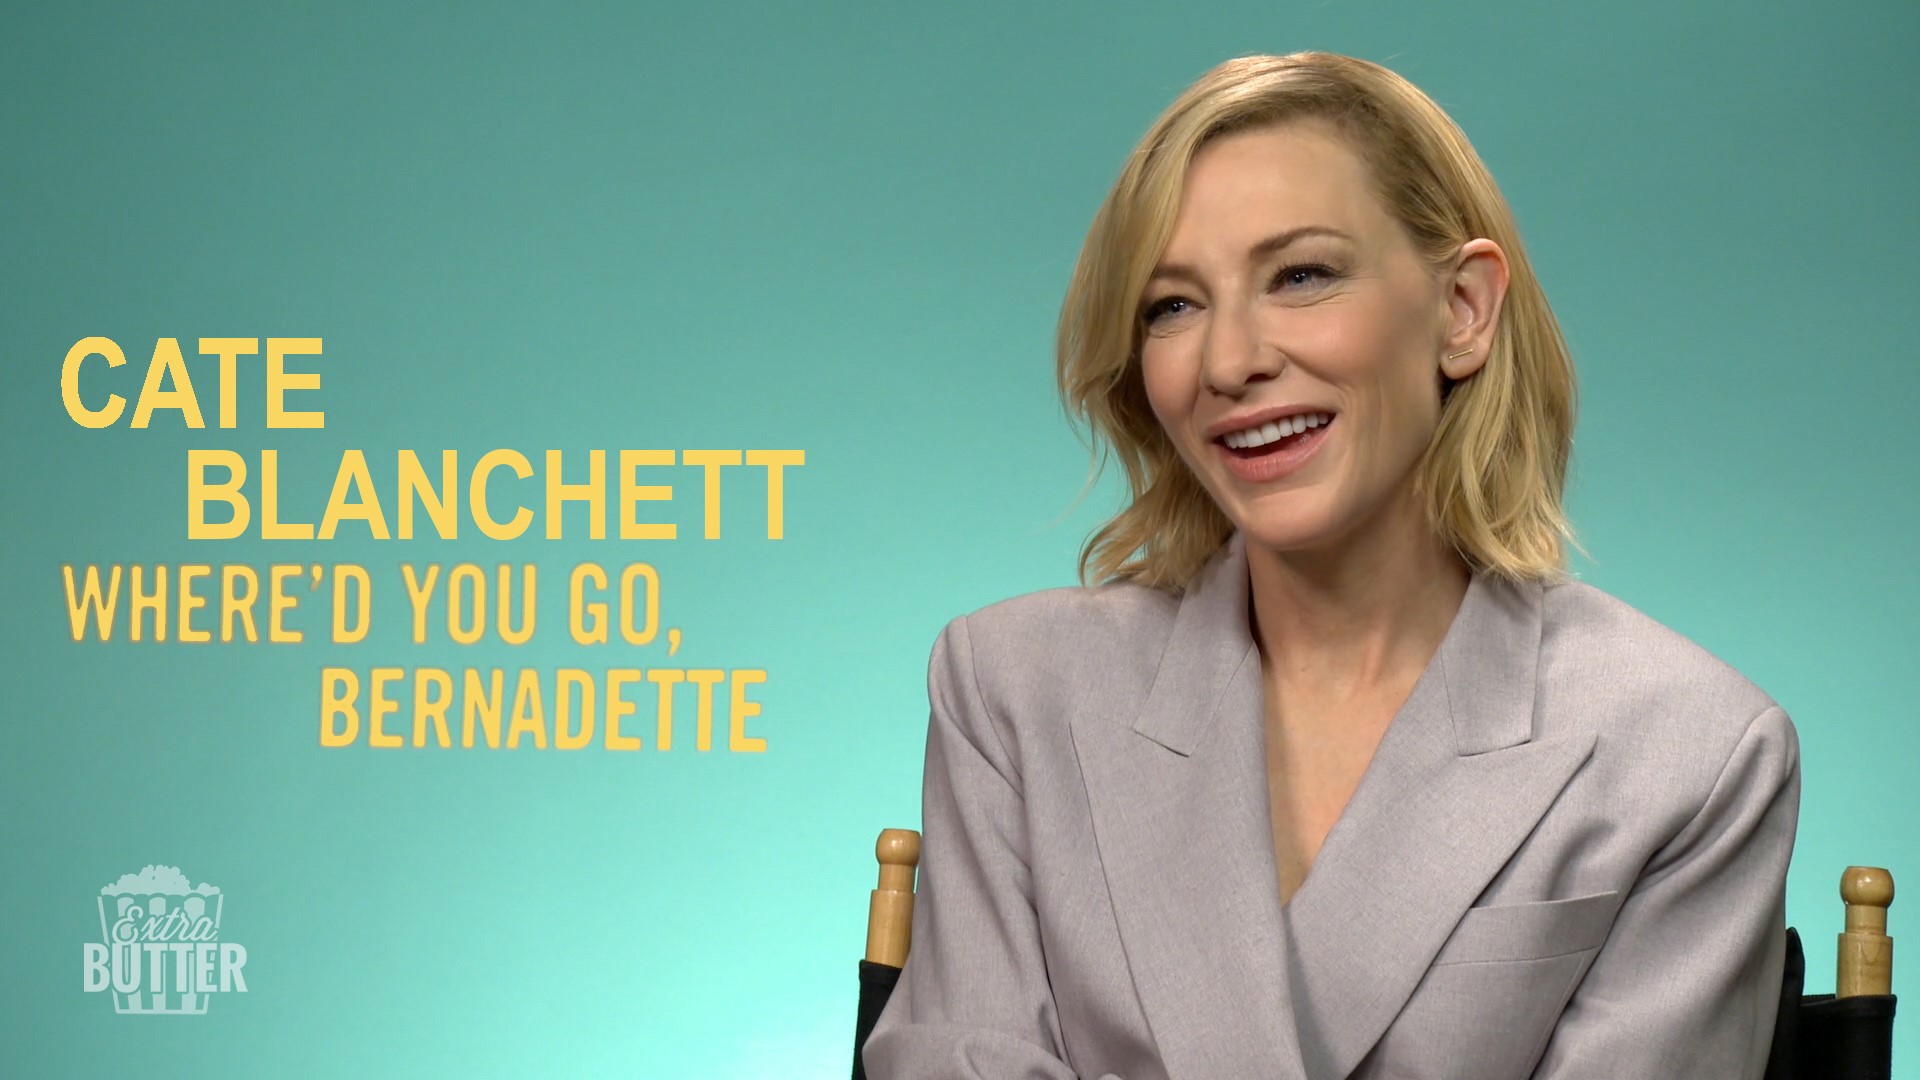 Cate Blanchett talks about meeting fans at the supermarket. Cate also opens up about her love for the book 'Where'd You Go, Bernadette' and what drew her to the movie.